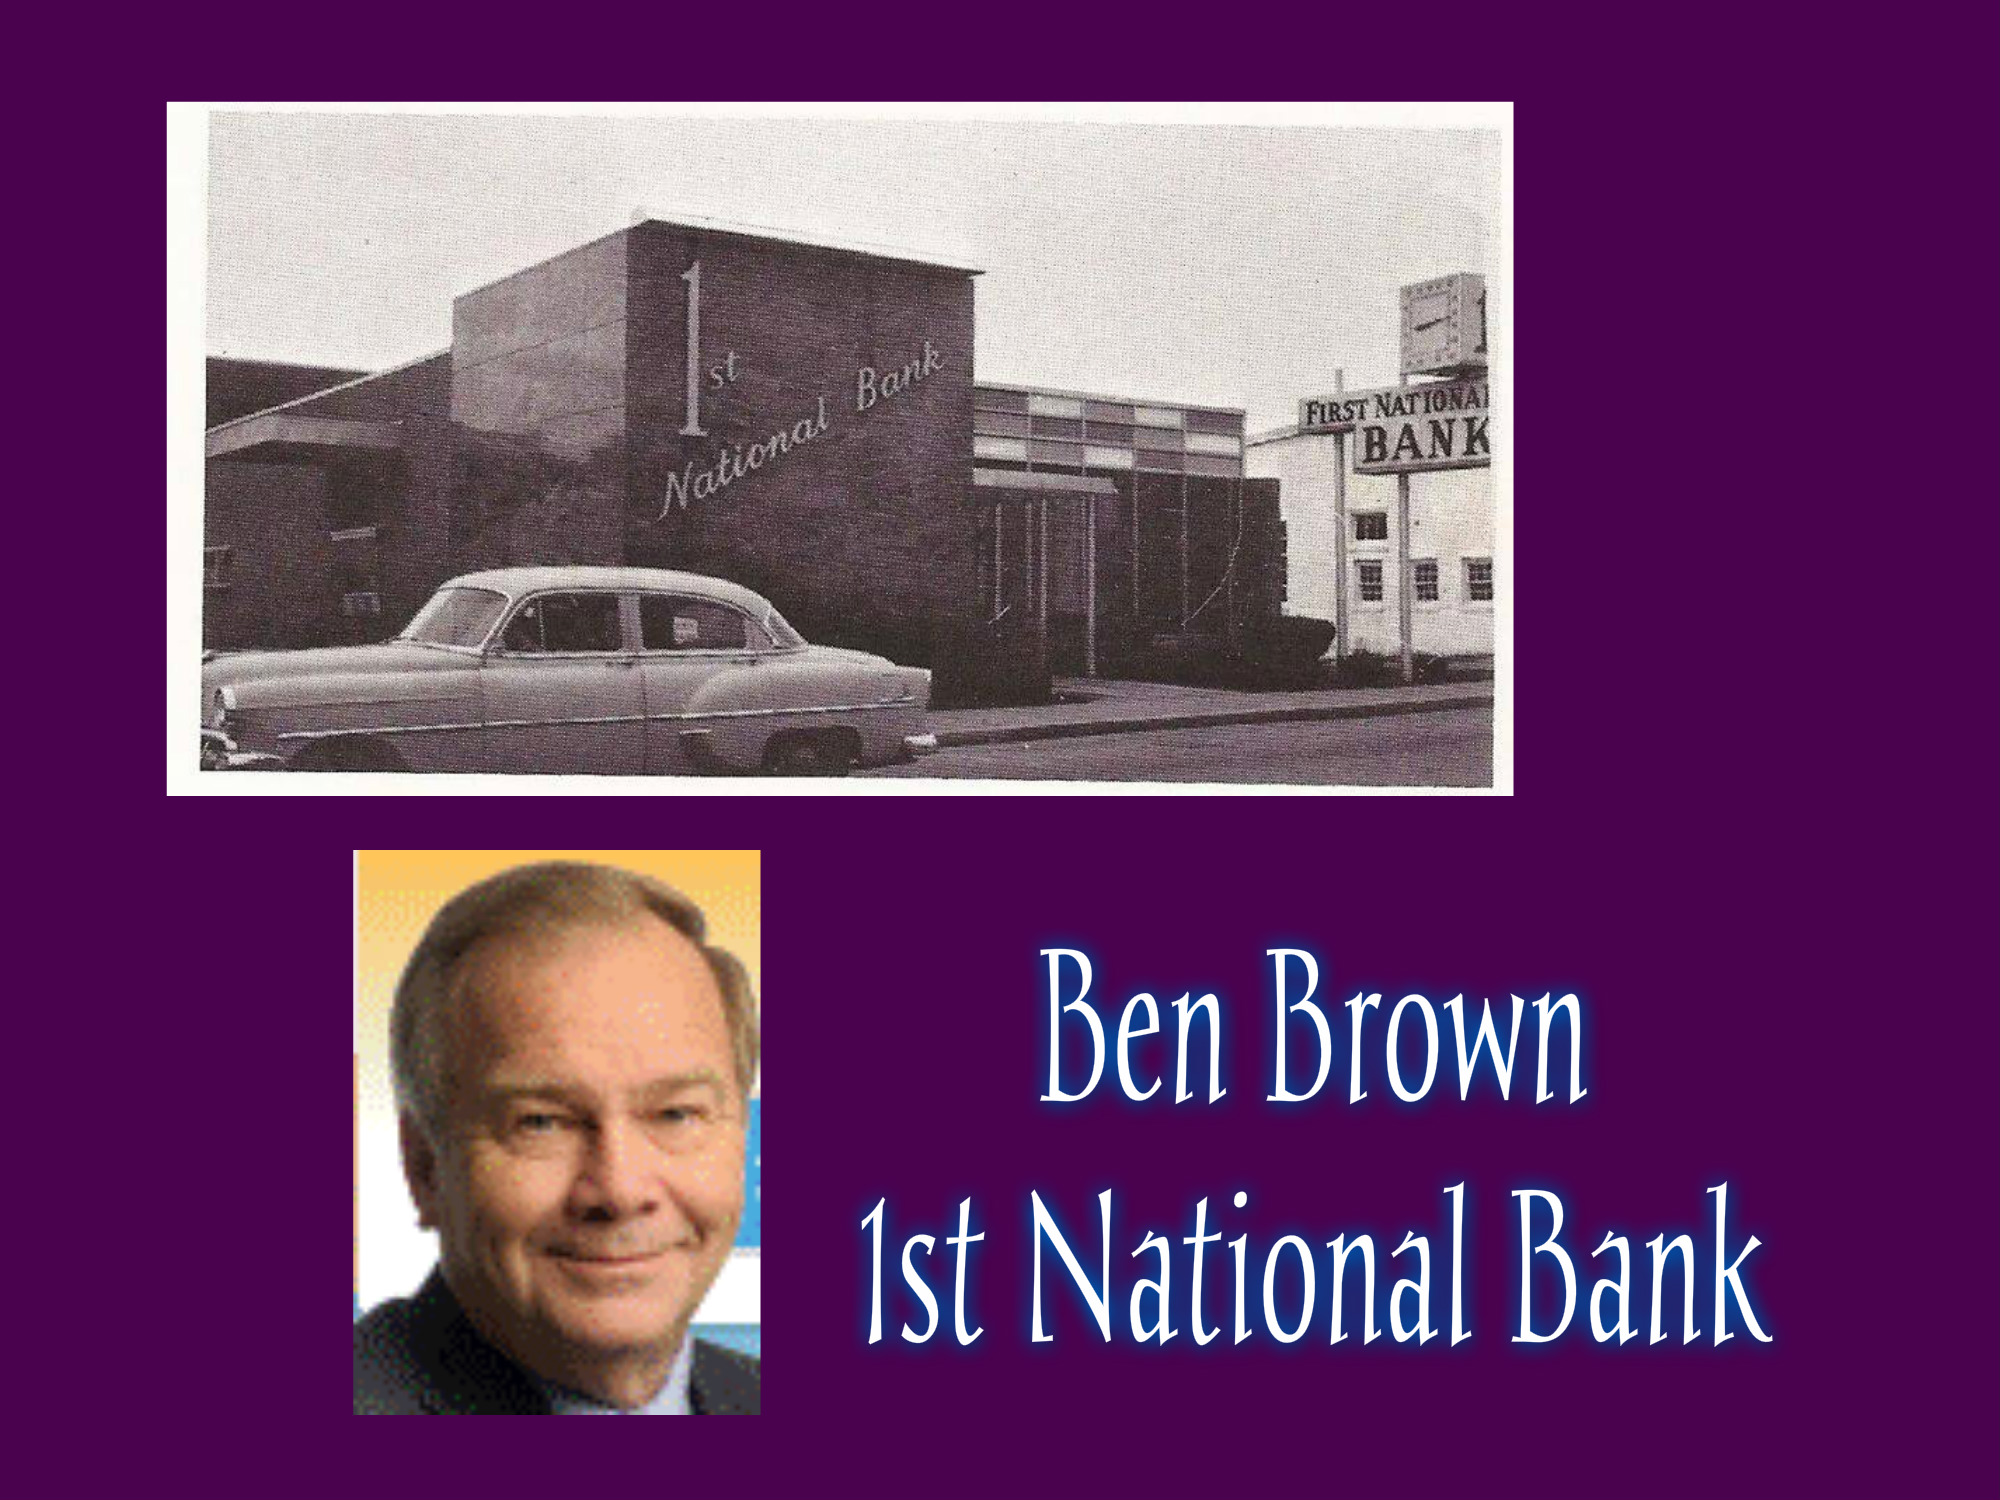 1st National Bank (with Ben Brown) - 2/20/16 - # 62